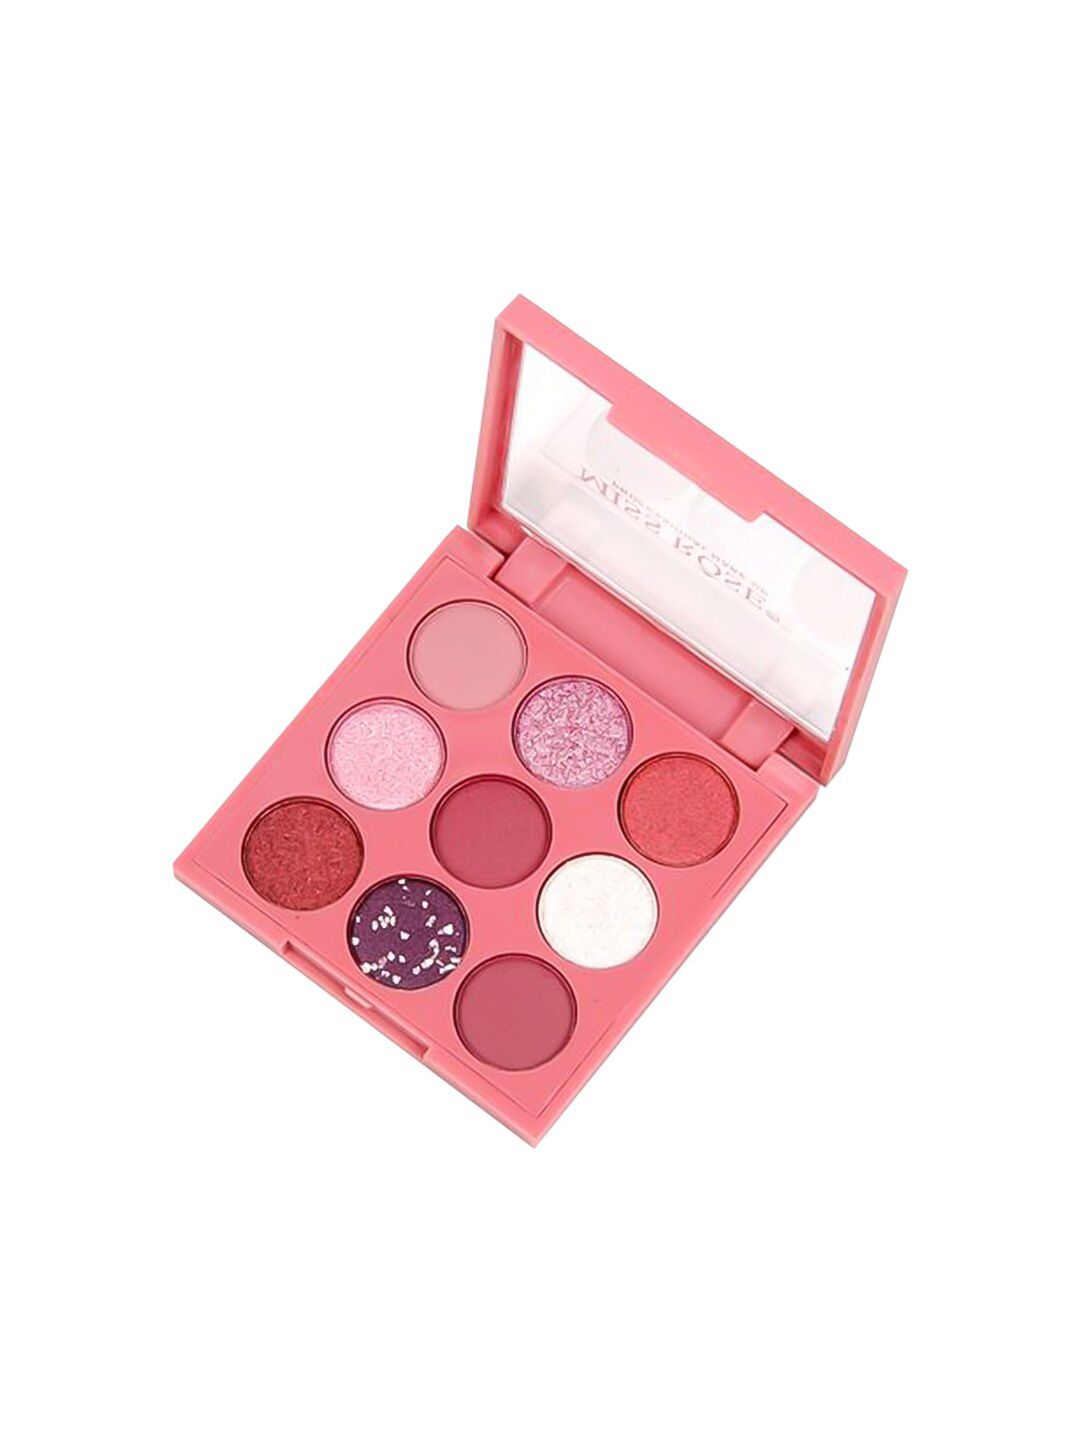 MISS ROSE 9 Color Matte  Glitter Mini Eyeshadow Palette Price in India